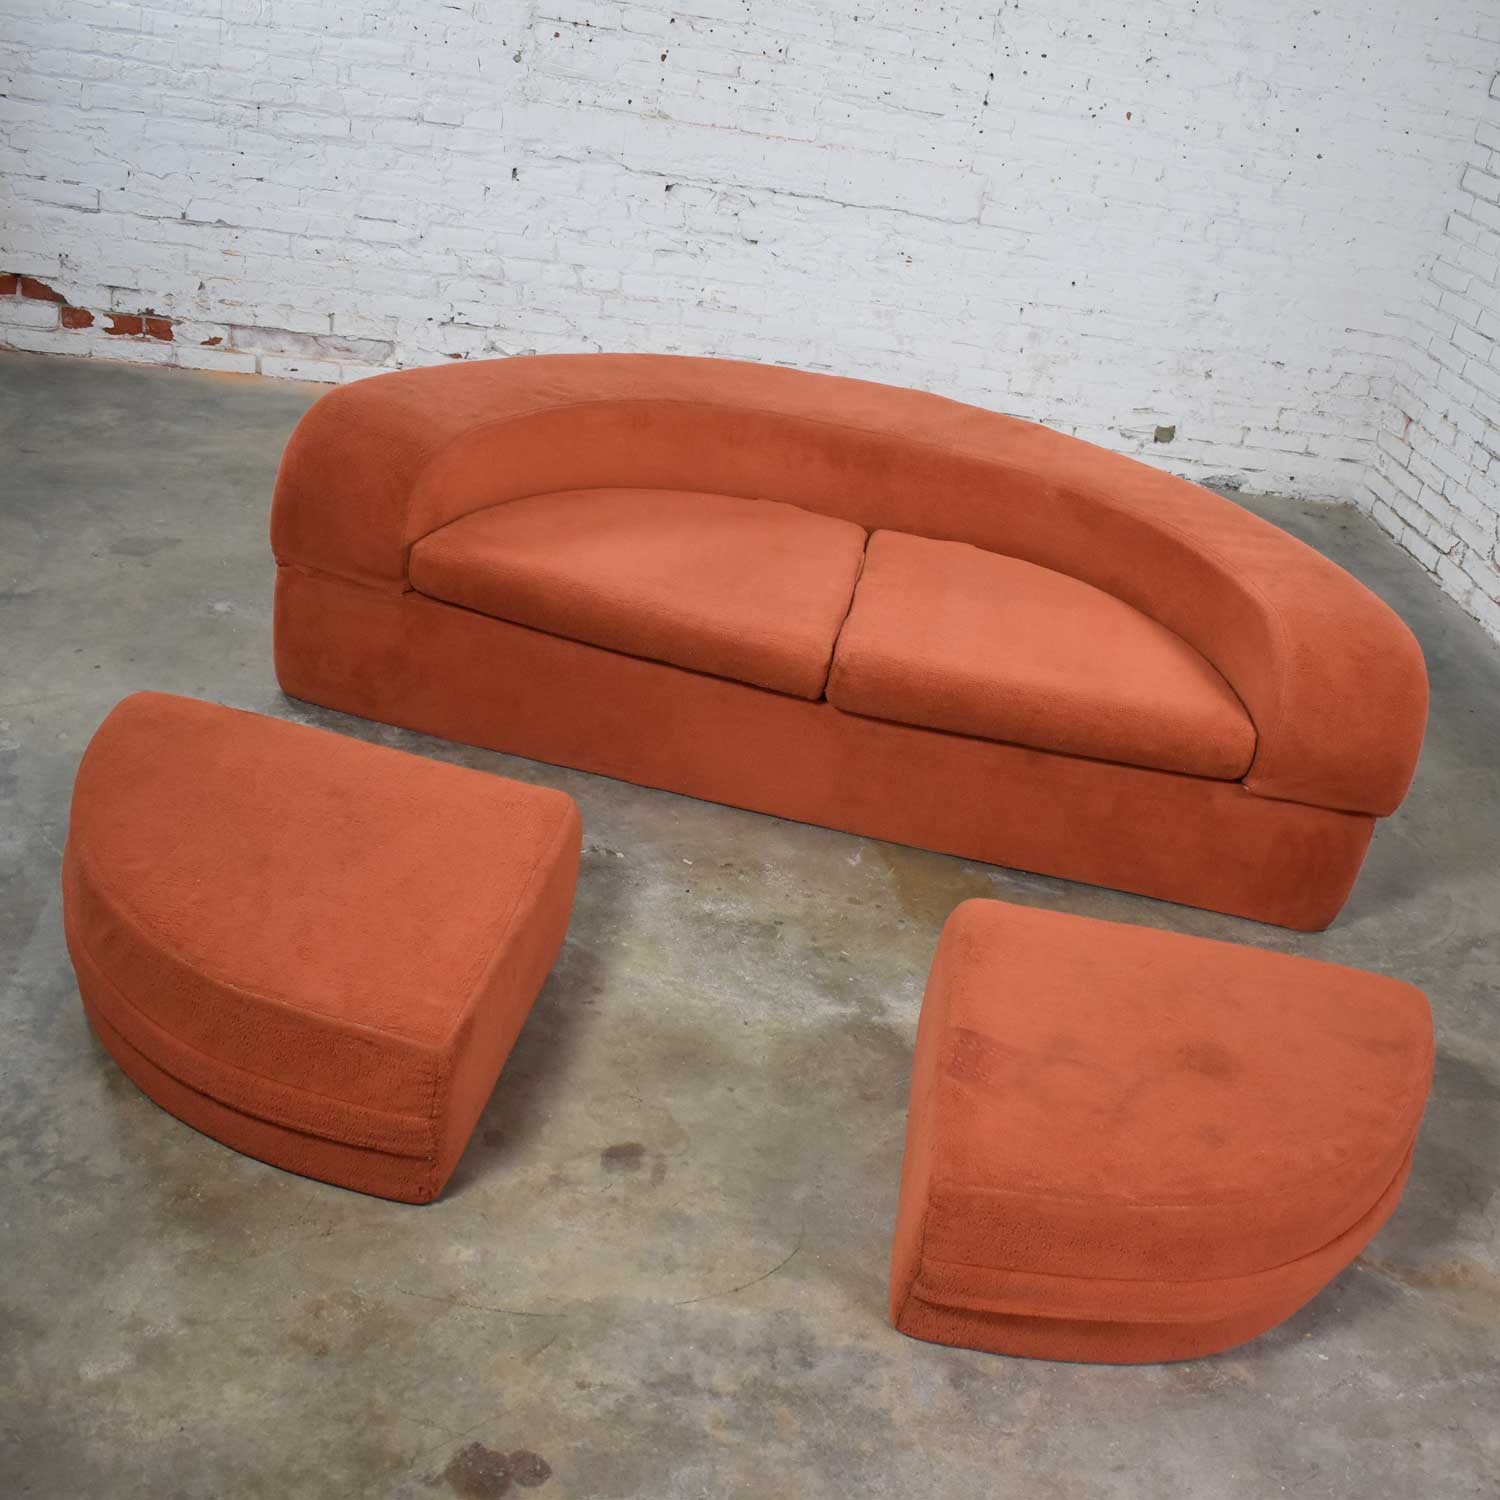 Mod Round Sleeper Sofa with Ottomans in Orange Fuzzy Fabric by Spherical Furniture